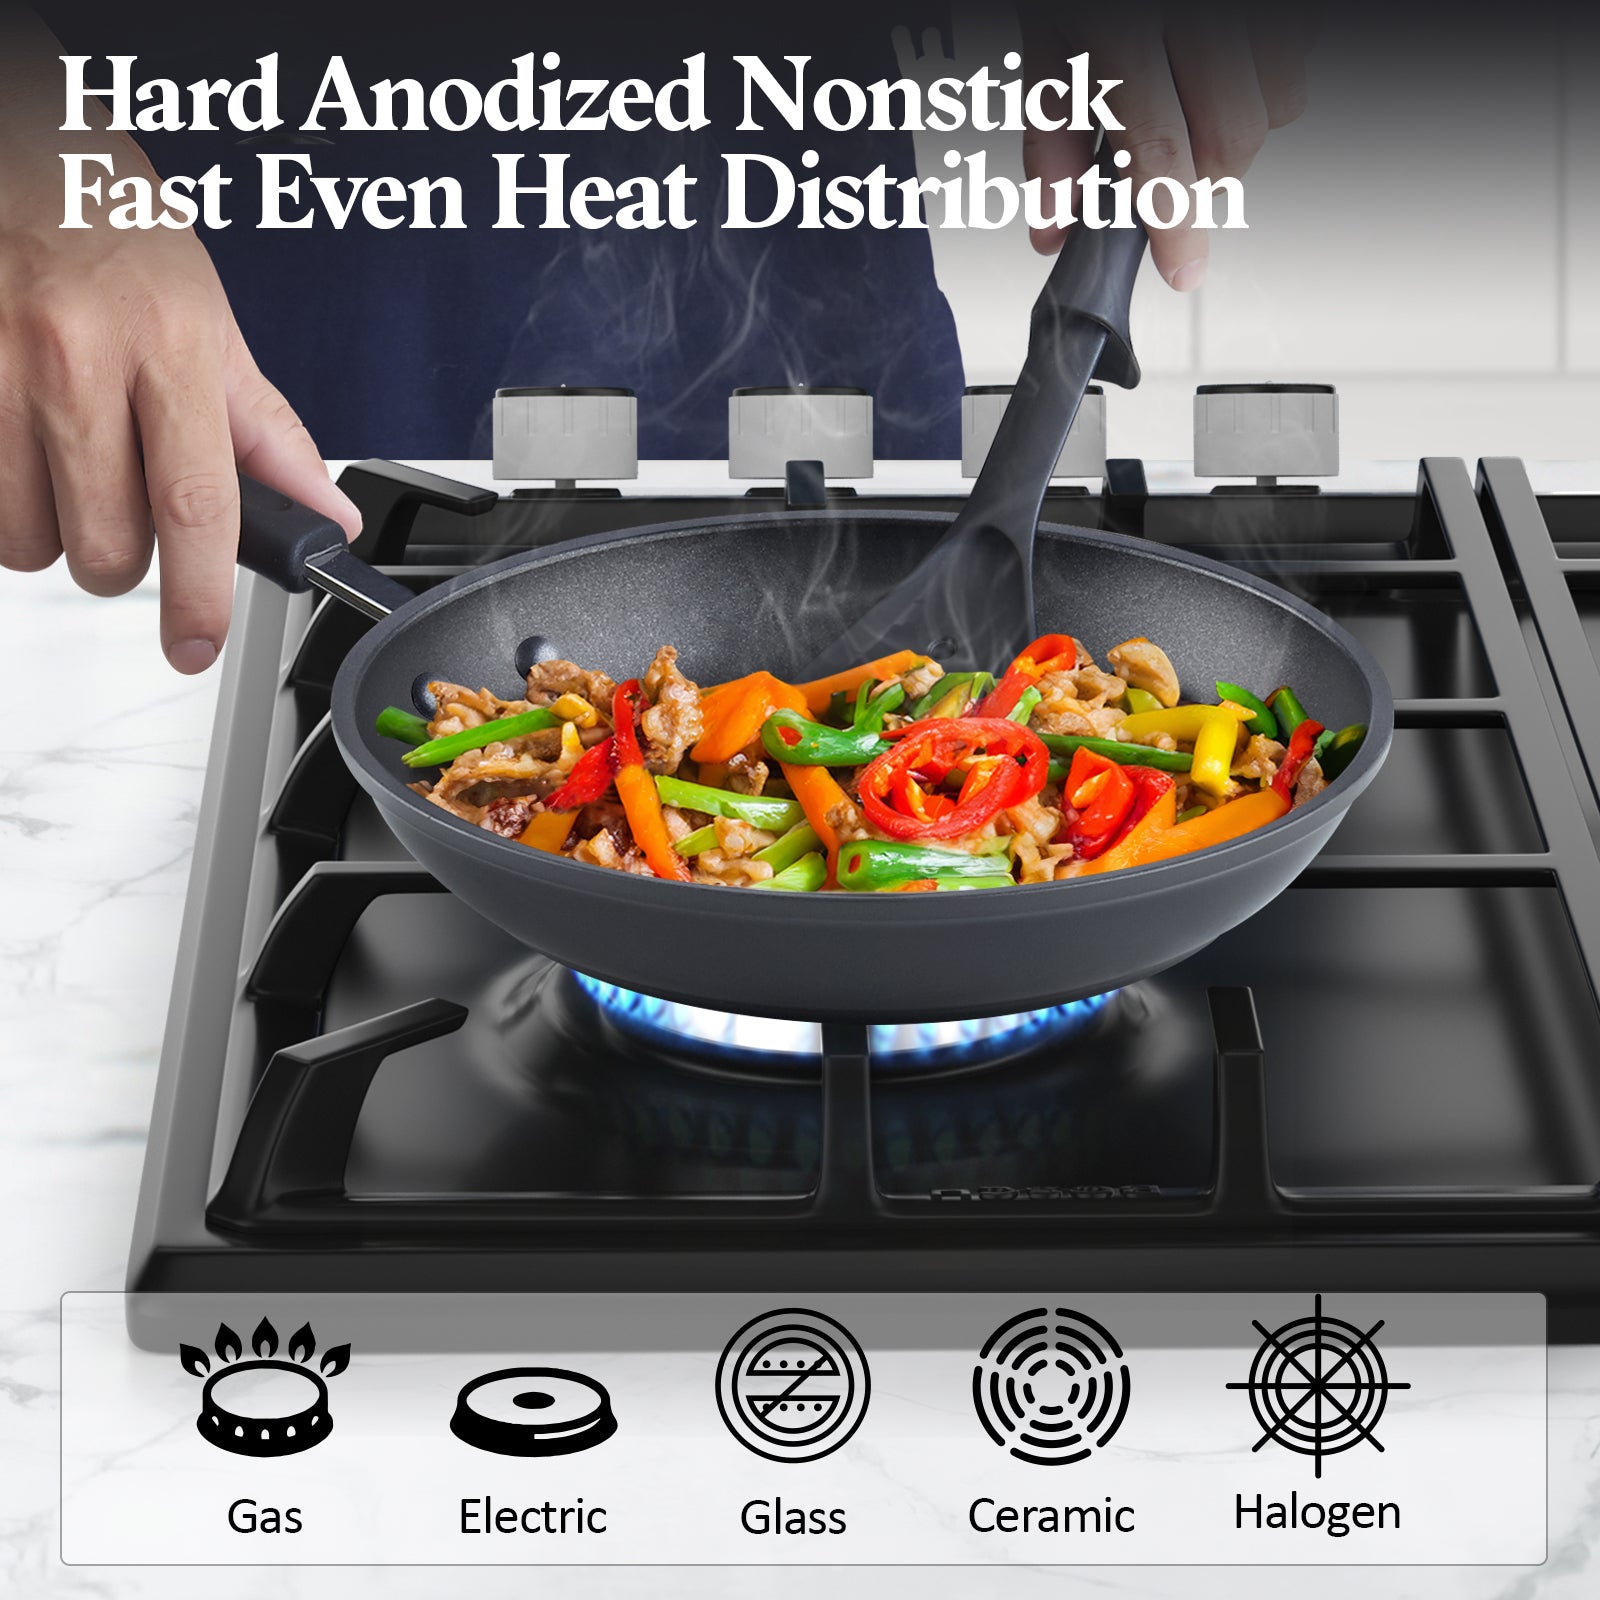 Cook N Home Professional Hard Anodized Nonstick Saute Pan With Lid